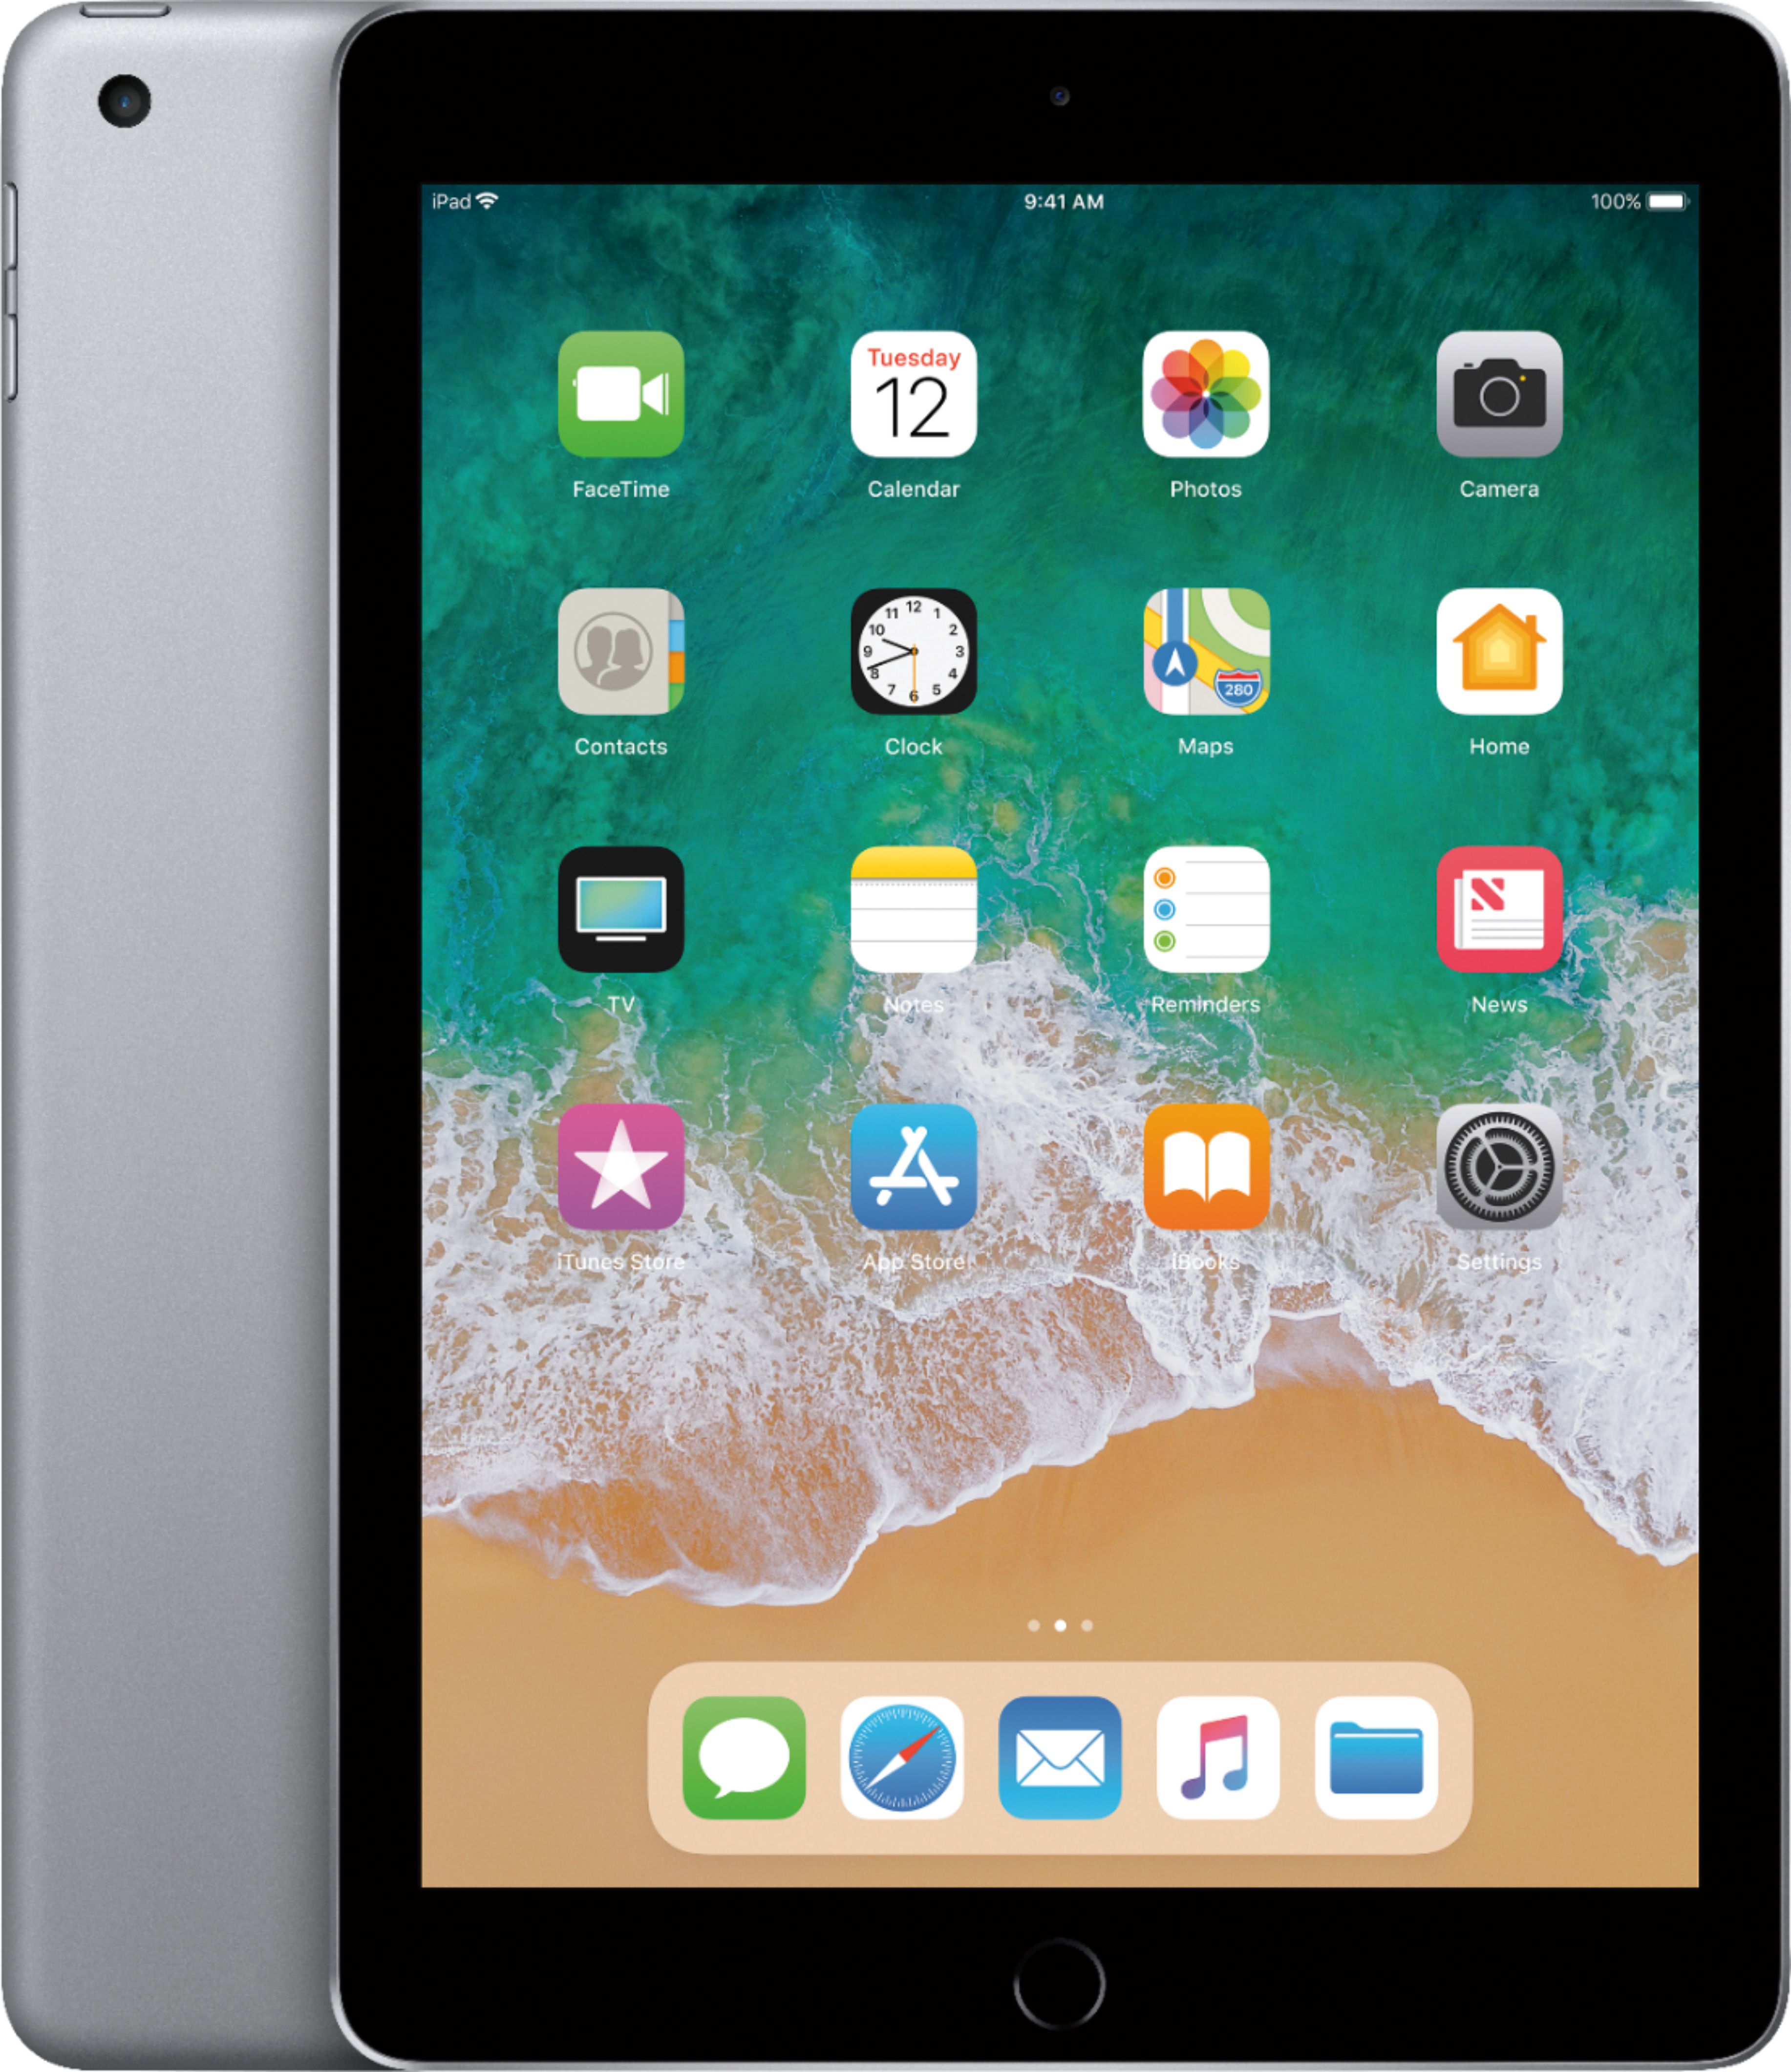 Apple iPad (5th generation) with WiFi + Cellular- 32GB (AT&T) Space Gray MP242LL/A - Best Buy